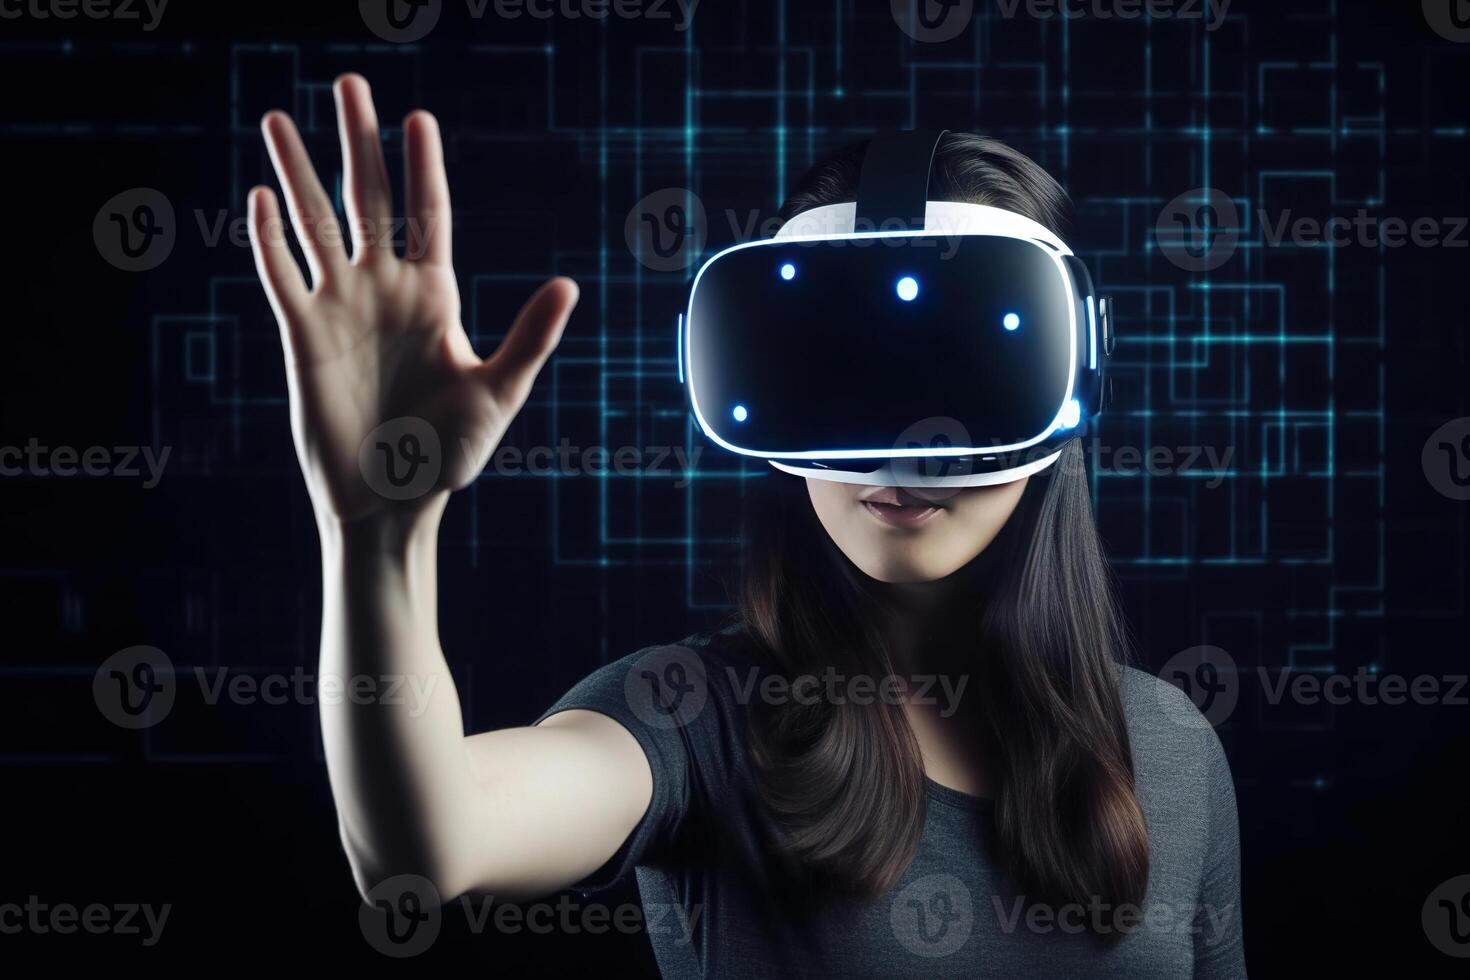 https://static.vecteezy.com/system/resources/previews/022/864/238/non_2x/a-woman-wearing-a-virtual-reality-headset-touching-the-virtual-object-on-dark-background-ai-generated-photo.jpg